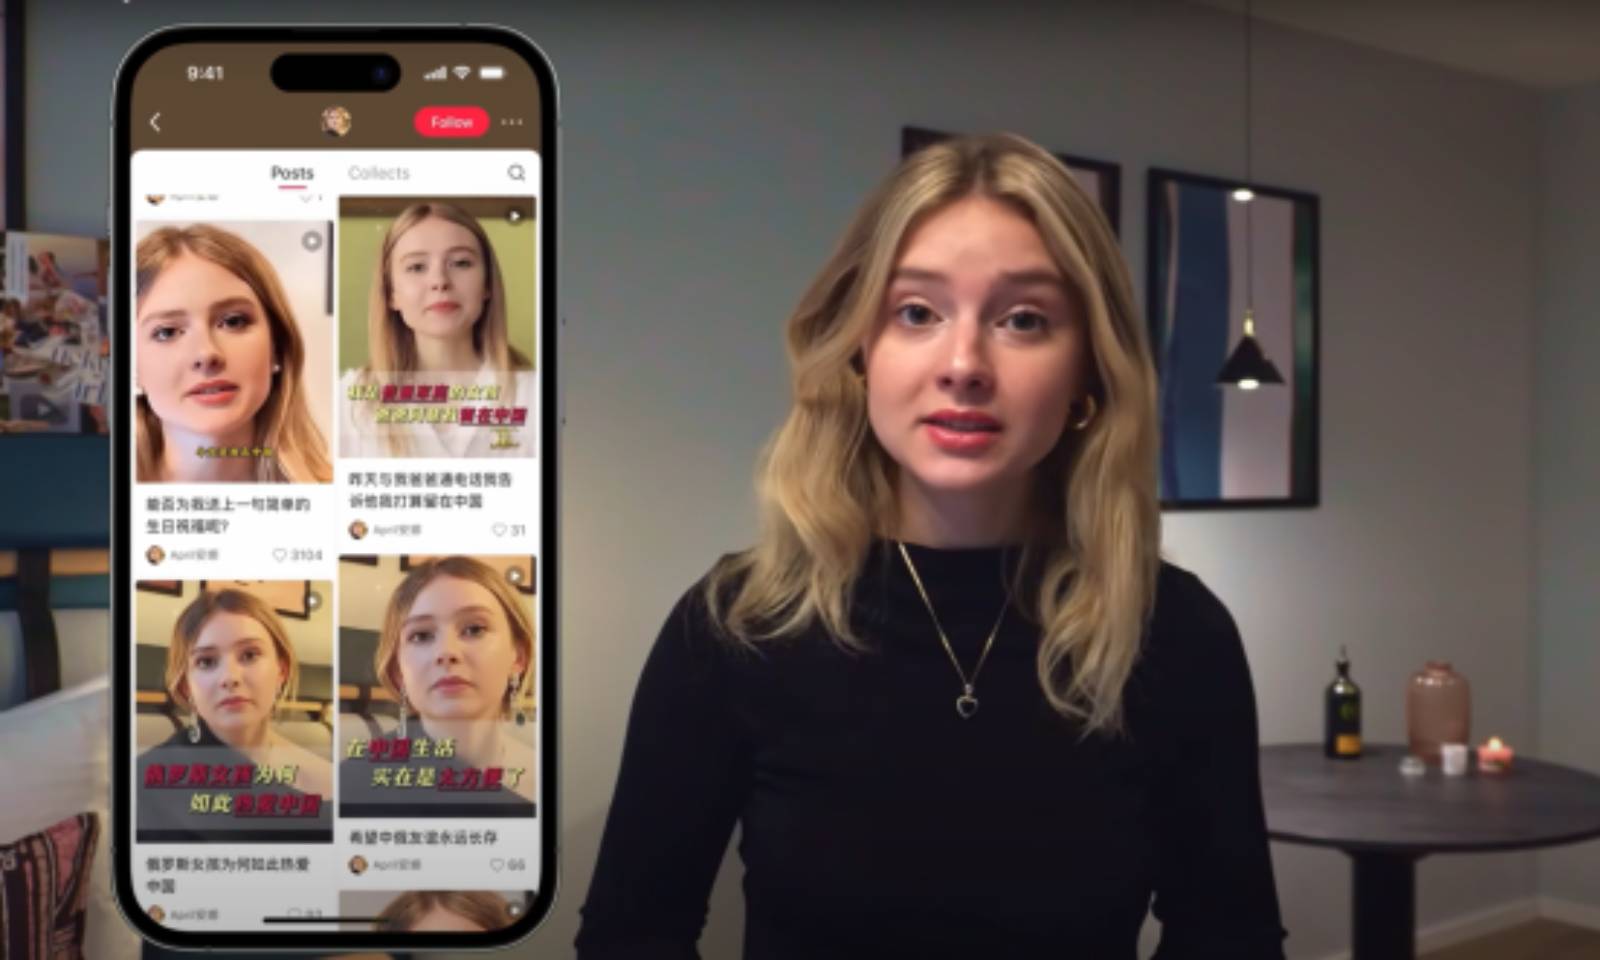 Ukrainian YouTuber's Identity Cloned by AI, Sparks Global Concern Over Digital Privacy